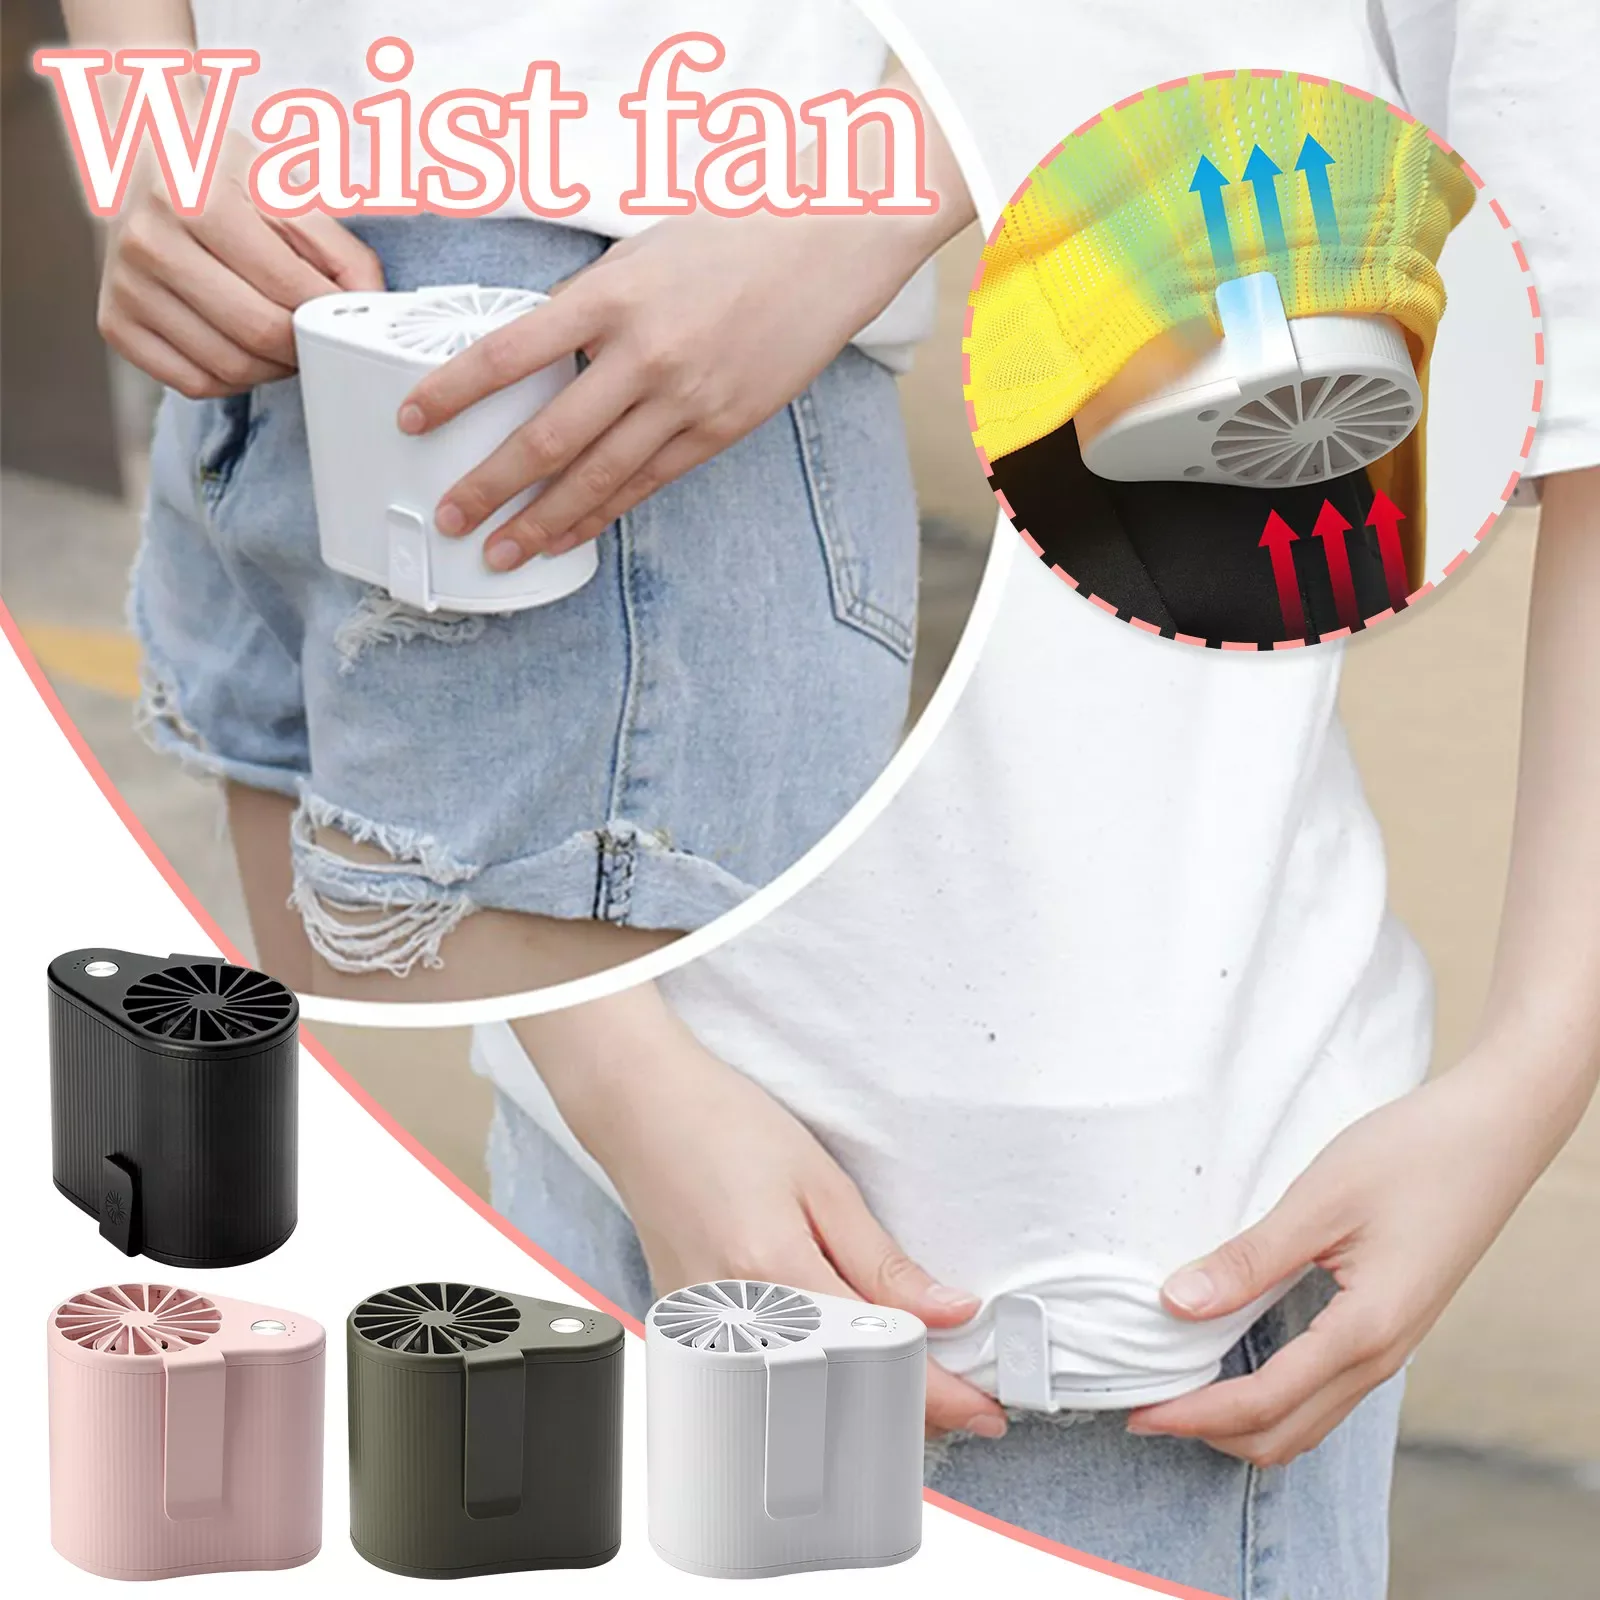 Usb Portable Personal Hanging Waist Fan With Recharge Battery Ultra Quiet Wearable  Fan Handheld Air Conditioner#dg4